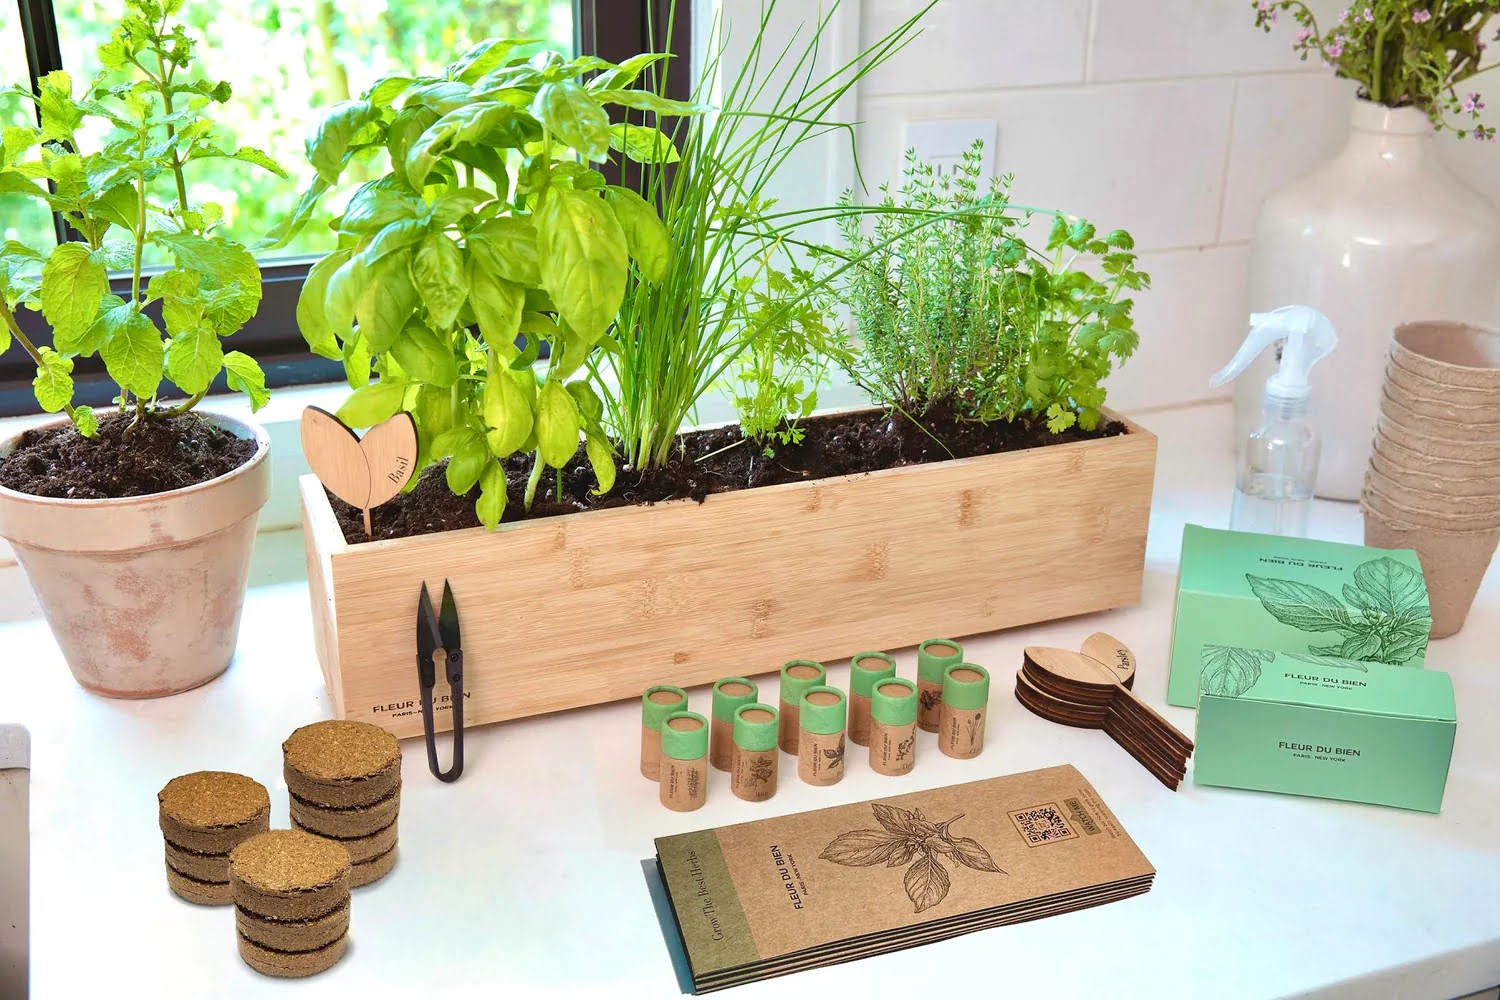 Review: Herb Garden Kit – A Comprehensive Analysis